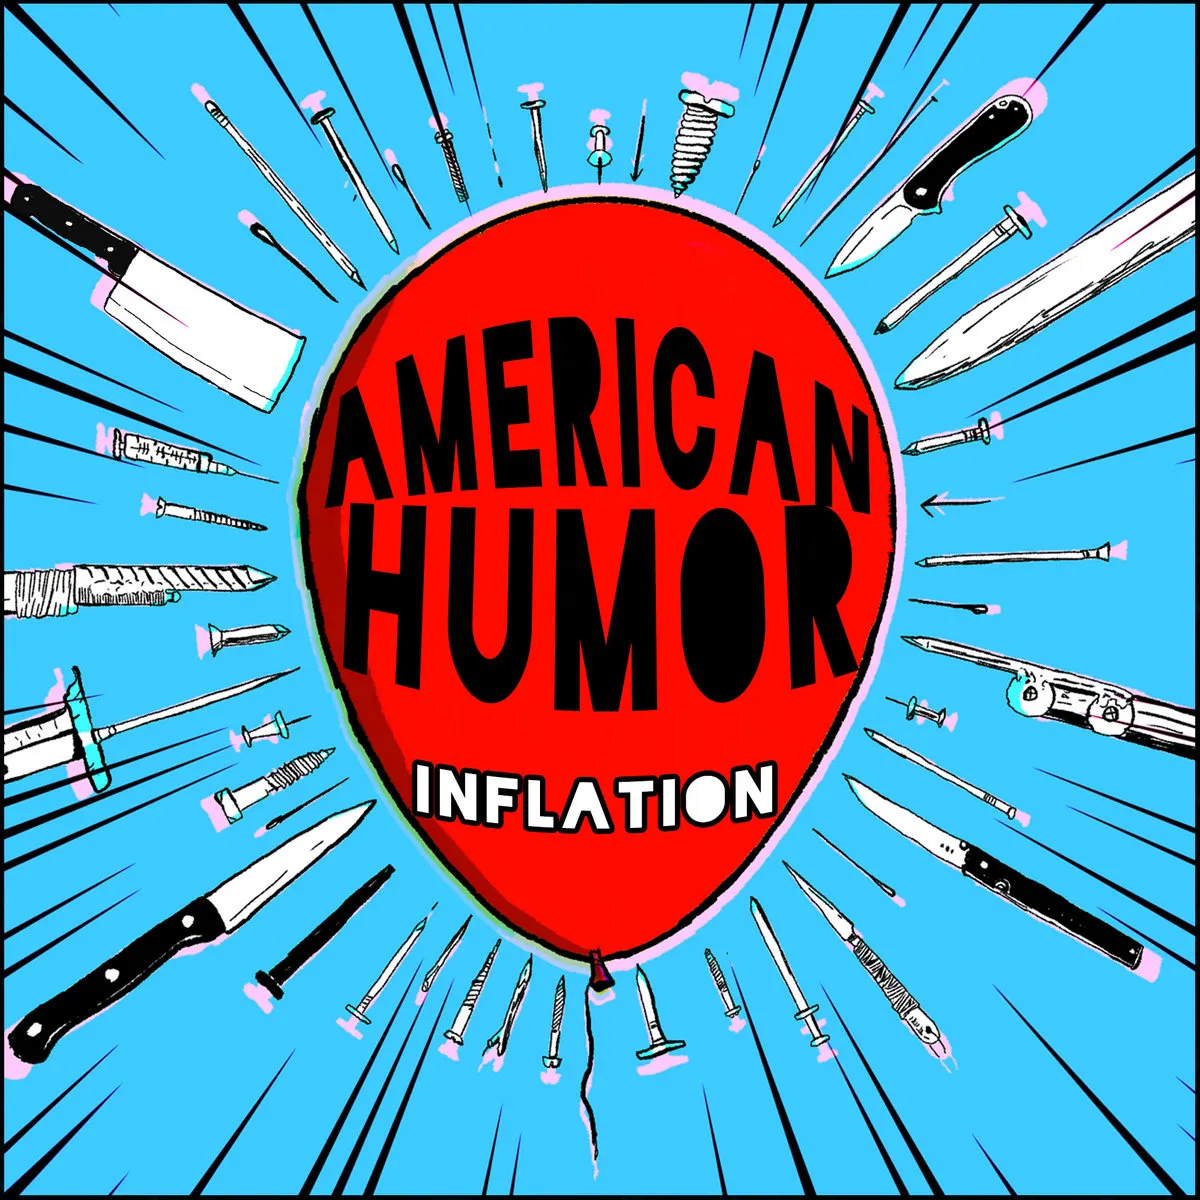 Album art for Inflation features a big red balloon against a blue background, surrounded on all sides by sharp objects.